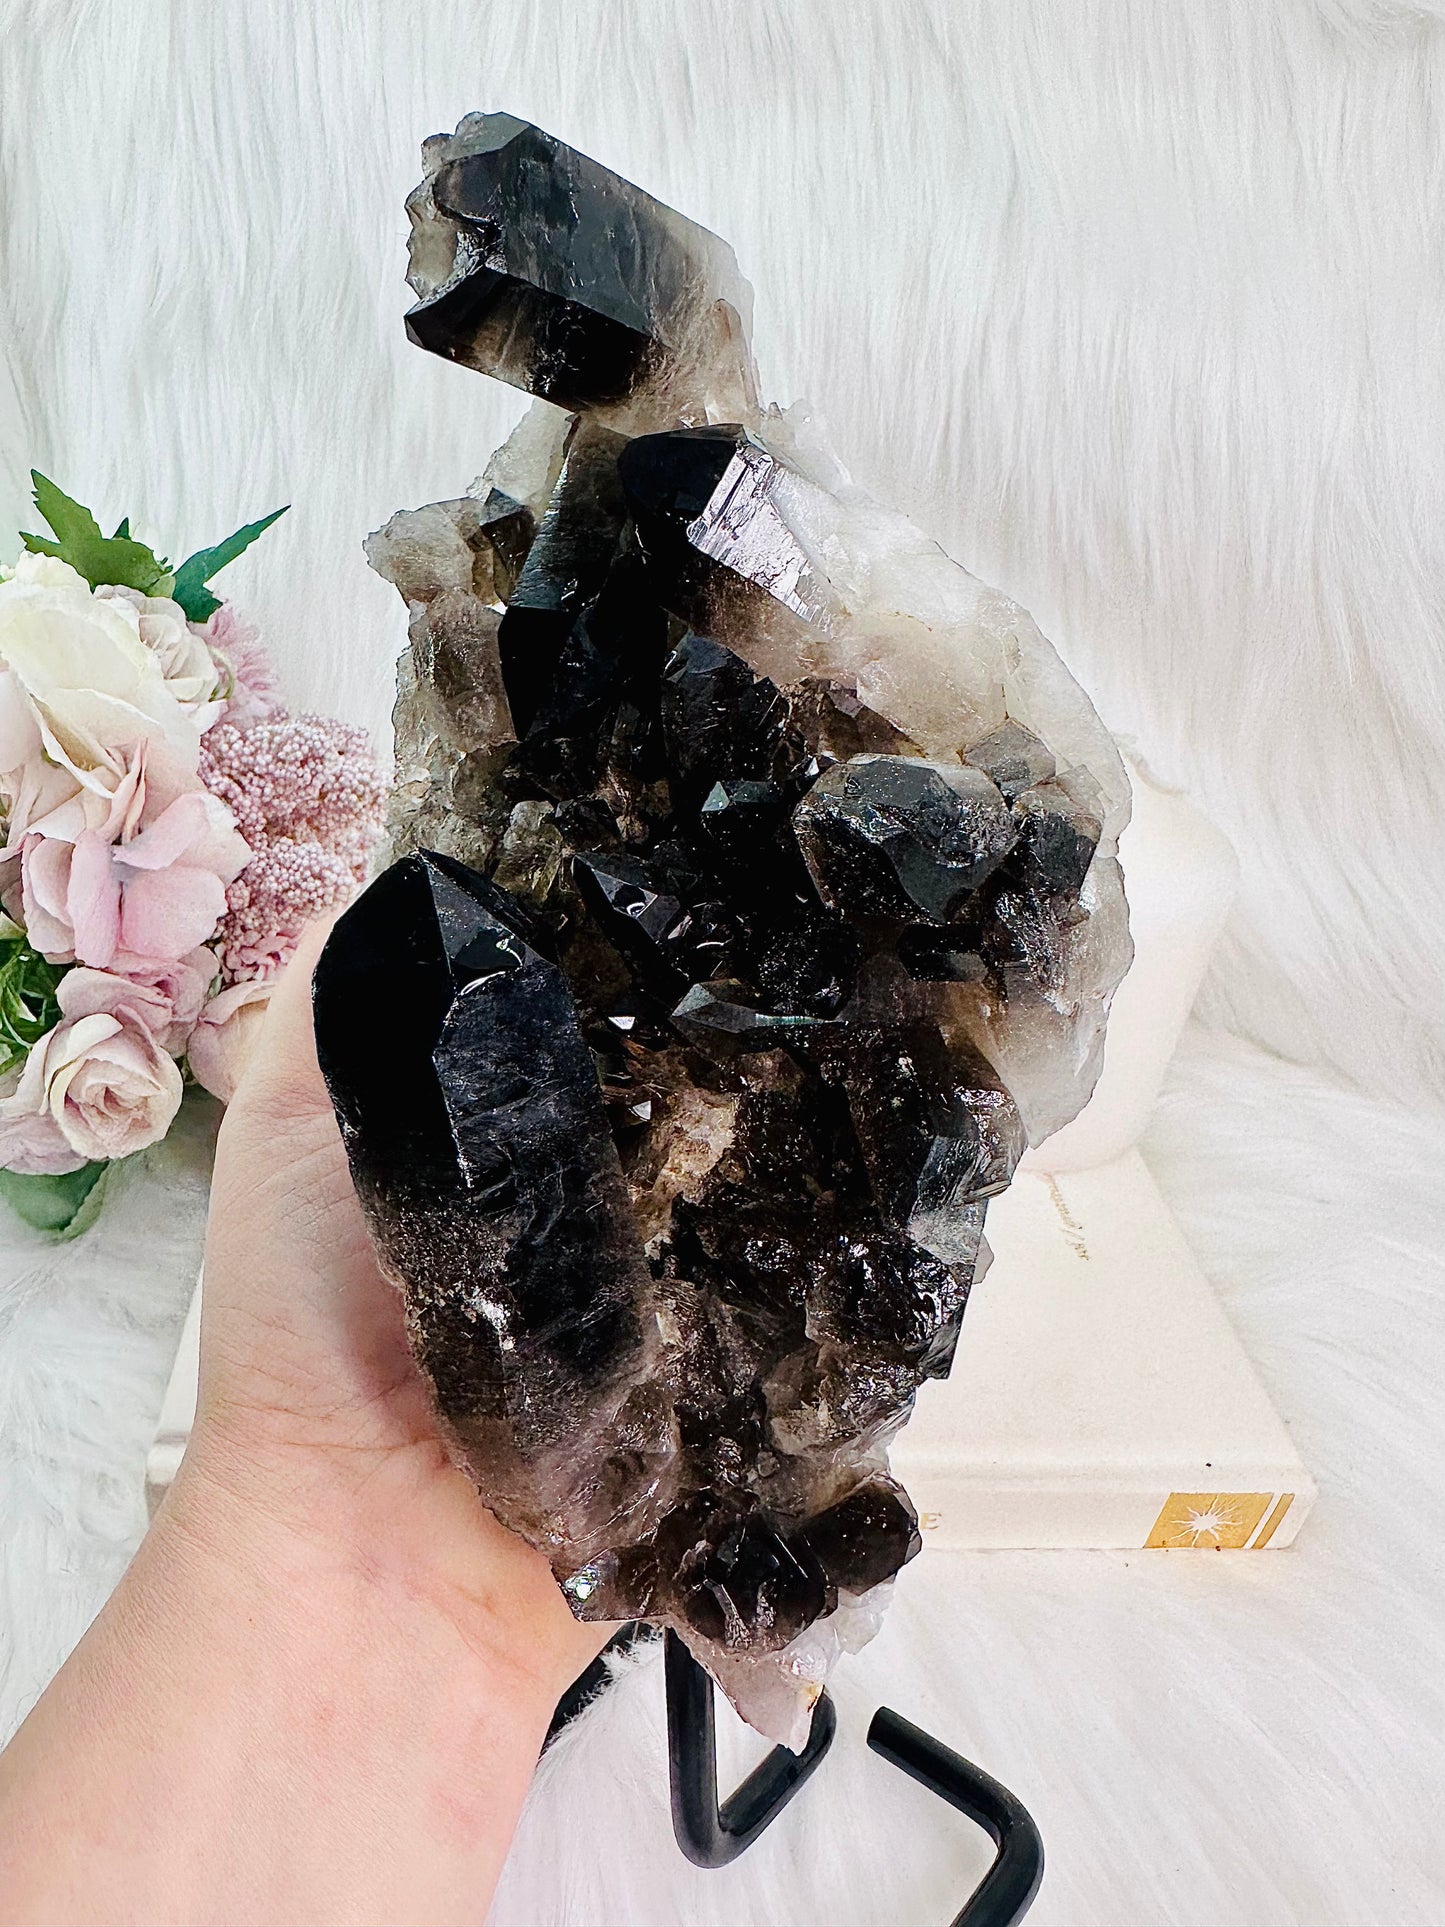 ⚜️ SALE ⚜️Statement Piece - Absolutely Phenomenal Huge 1.35KG 25cm Natural Smokey Quartz Cluster On Stand From Brazil